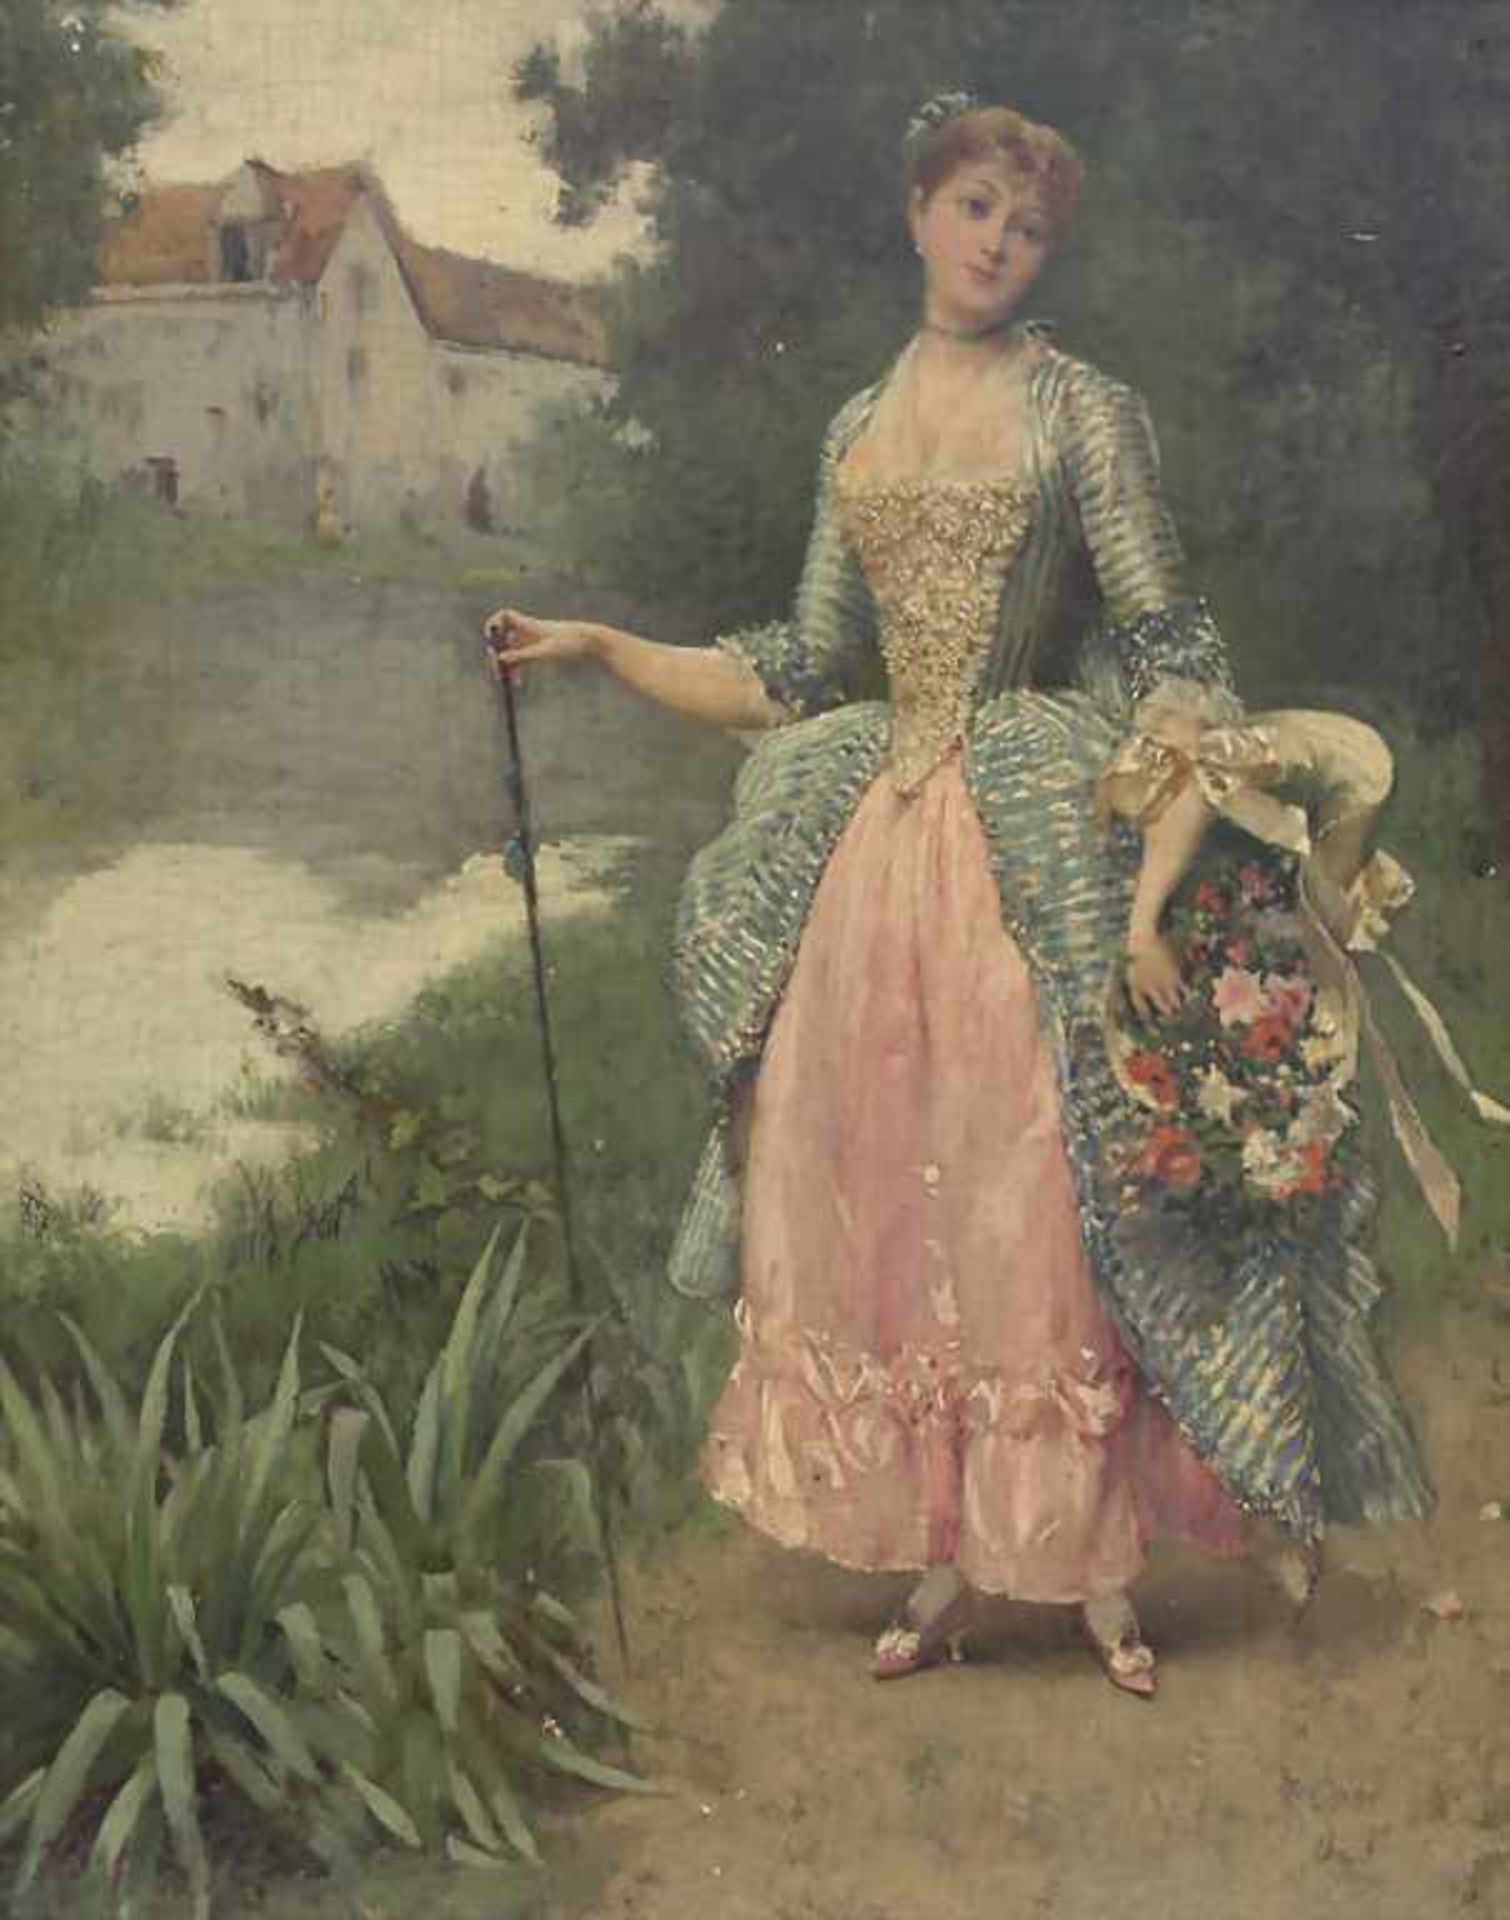 Oreste Cortazzo (1830/36-c.1912), 'Dame mit Blumenkorb' / 'A lady with flowers' - Image 2 of 5